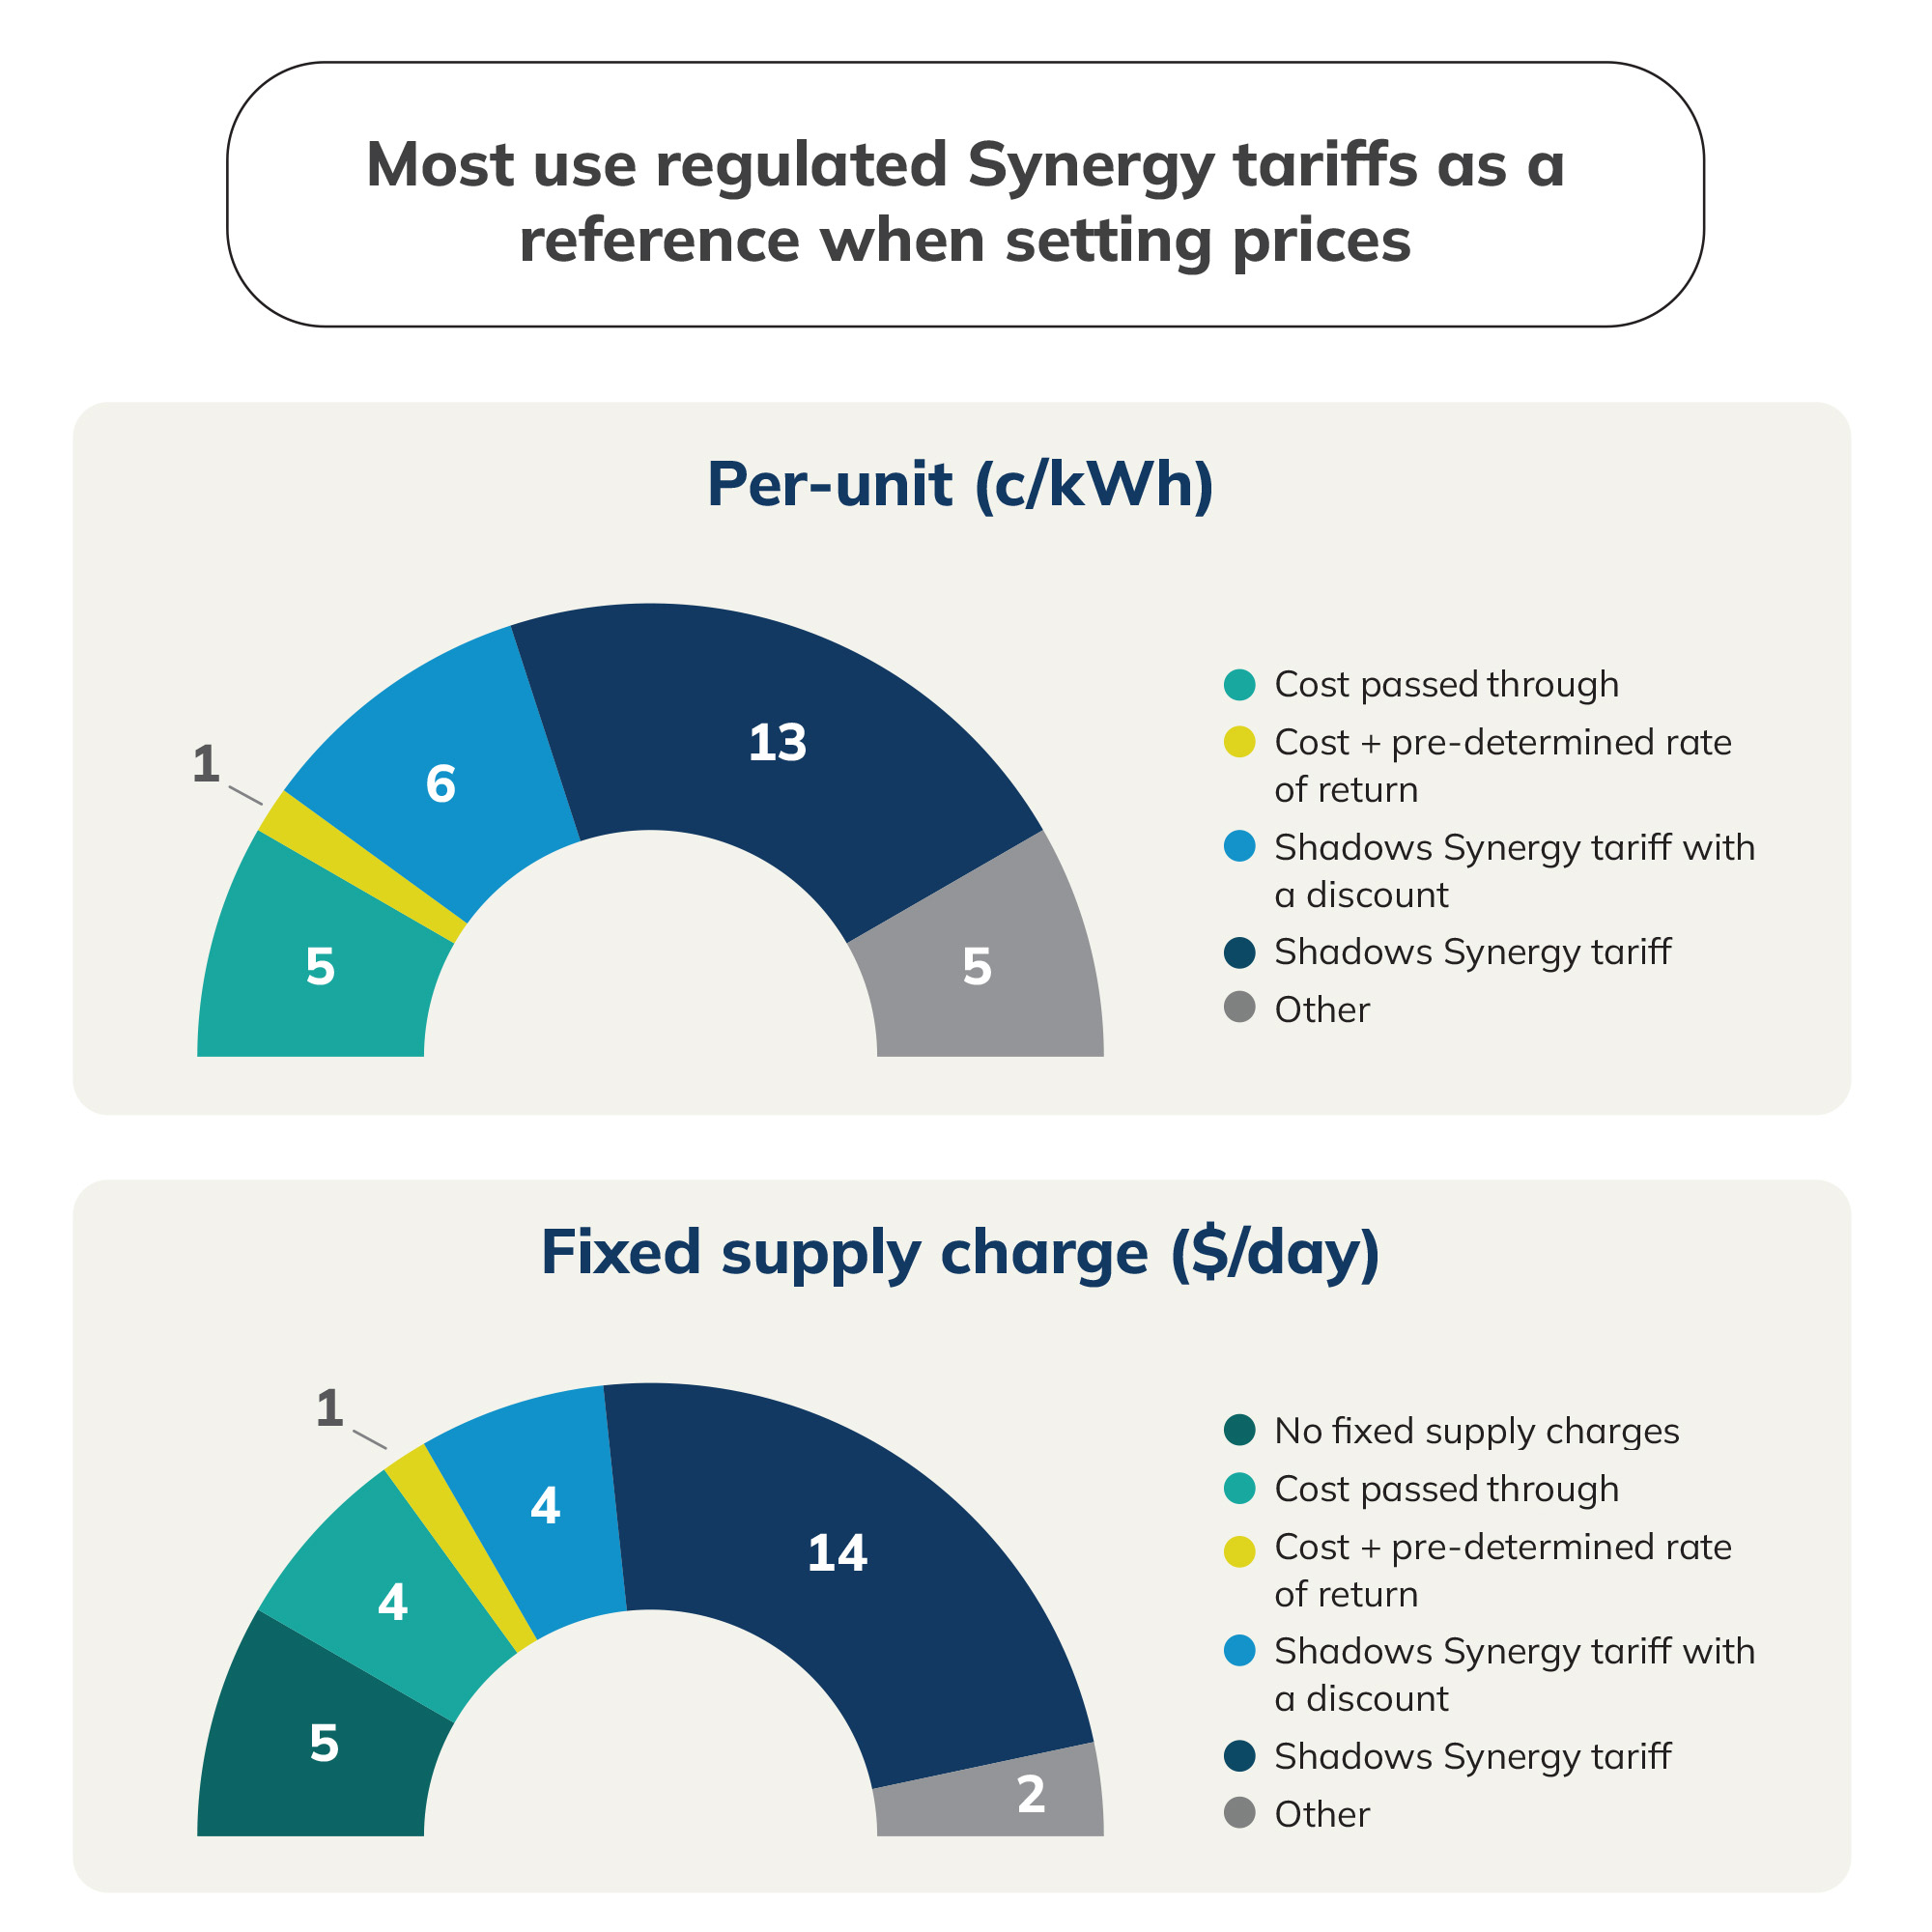 Network operators and service providers 4 - most use regulated Synergy tariffs as a reference when setting prices 